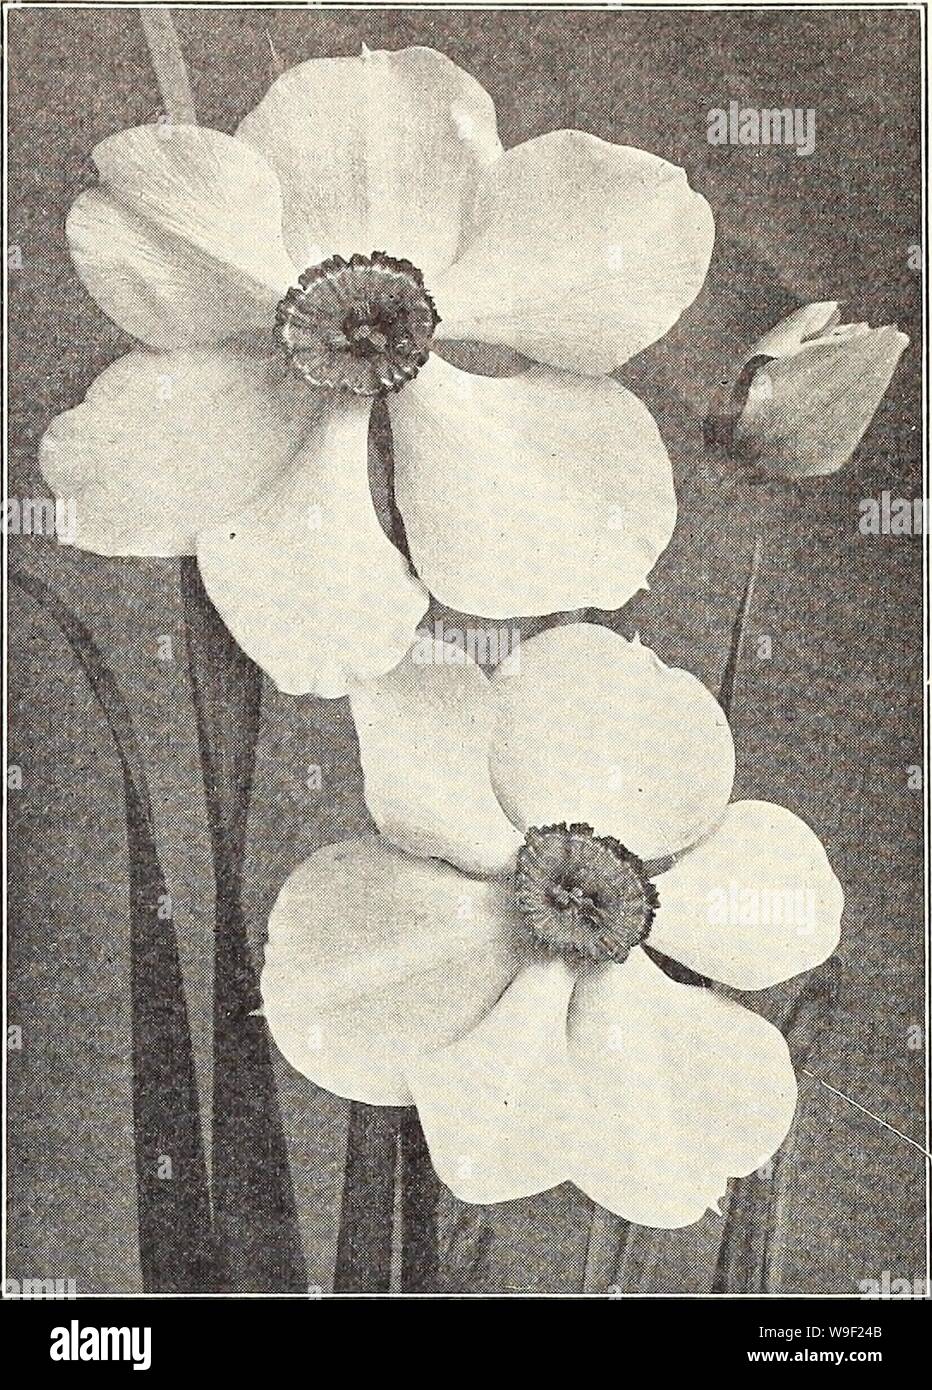 Archive image from page 10 of Currie's bulbs and plants . Currie's bulbs and plants : autumn 1926  curriesbulbsplan19curr 3 Year: 1926 ( Narcissus Poeticus. Each Doz. lOOi Poeticus (Pheasant's Eye)—Snow white, bright orange—scarlet cup $.12 $1.25 $9.00 Sir Watkin (Incomparabilis)—Enormous flowers, trumpet rich yellow, suffused with orange, sulphur perianth 18 2.00 15.00 Double Narcissus DAFFODILS. While the double Daffodils are not considered as at- tractive as the large flowering single trumpet sorts, they are no less desirable, and are especially adapted for naturalizing in odd corners, wher Stock Photo